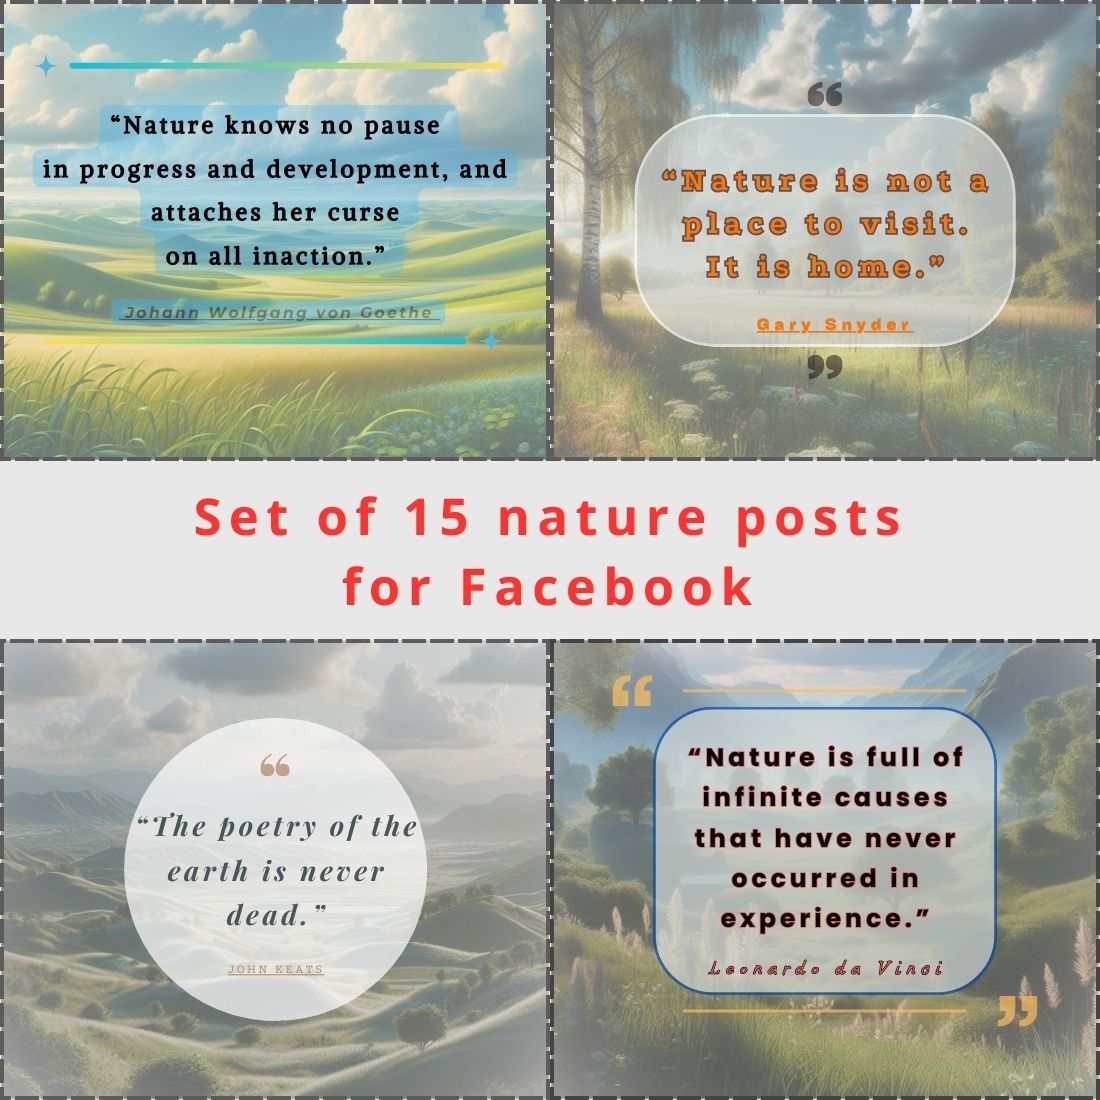 Quotes for Facebook Set of 15 nature posts for Facebook preview image.